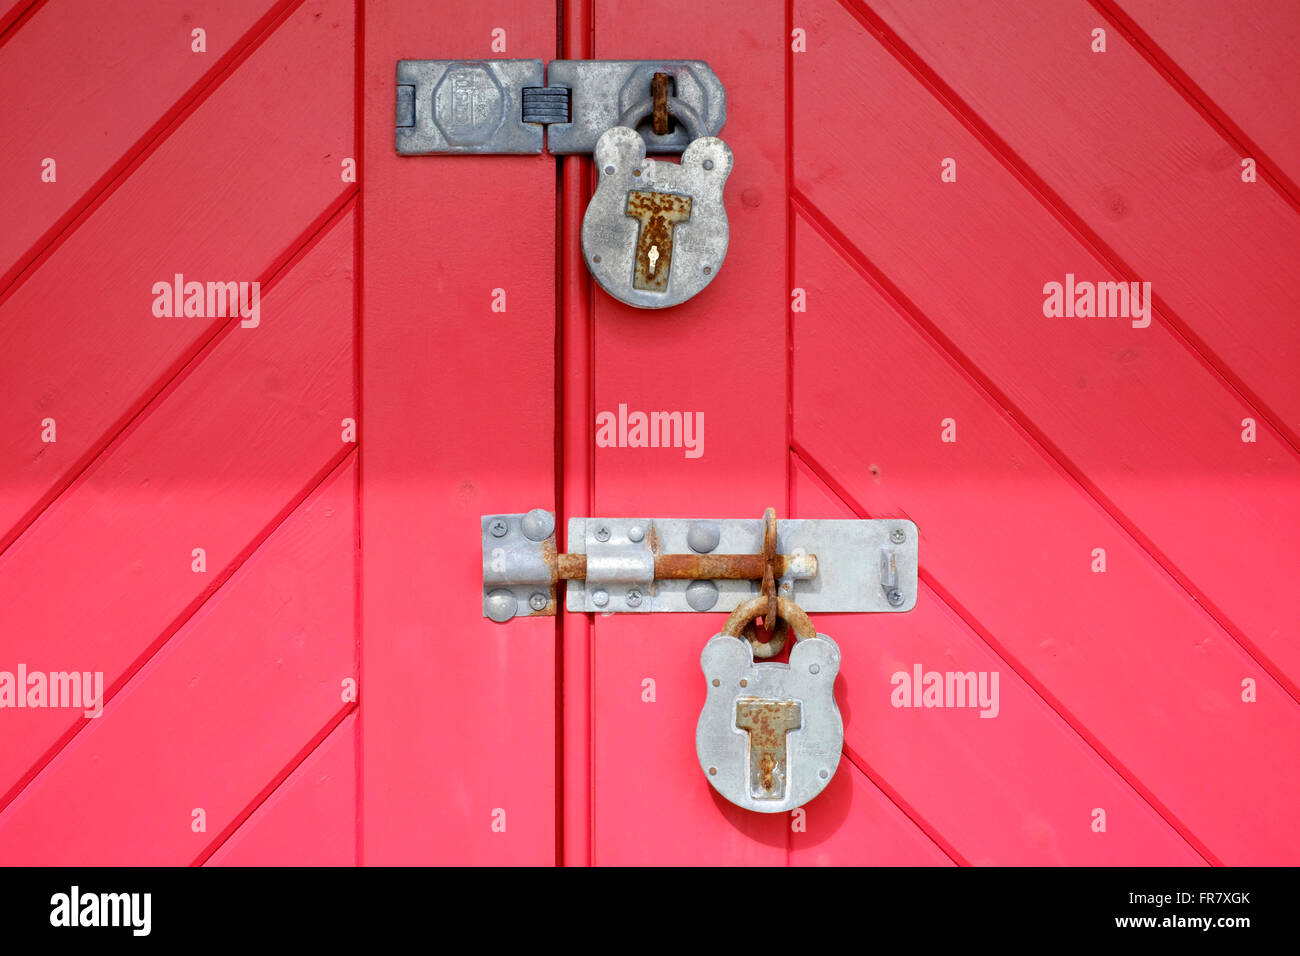 padlocks on brightly red painted wooden doors uk Stock Photo